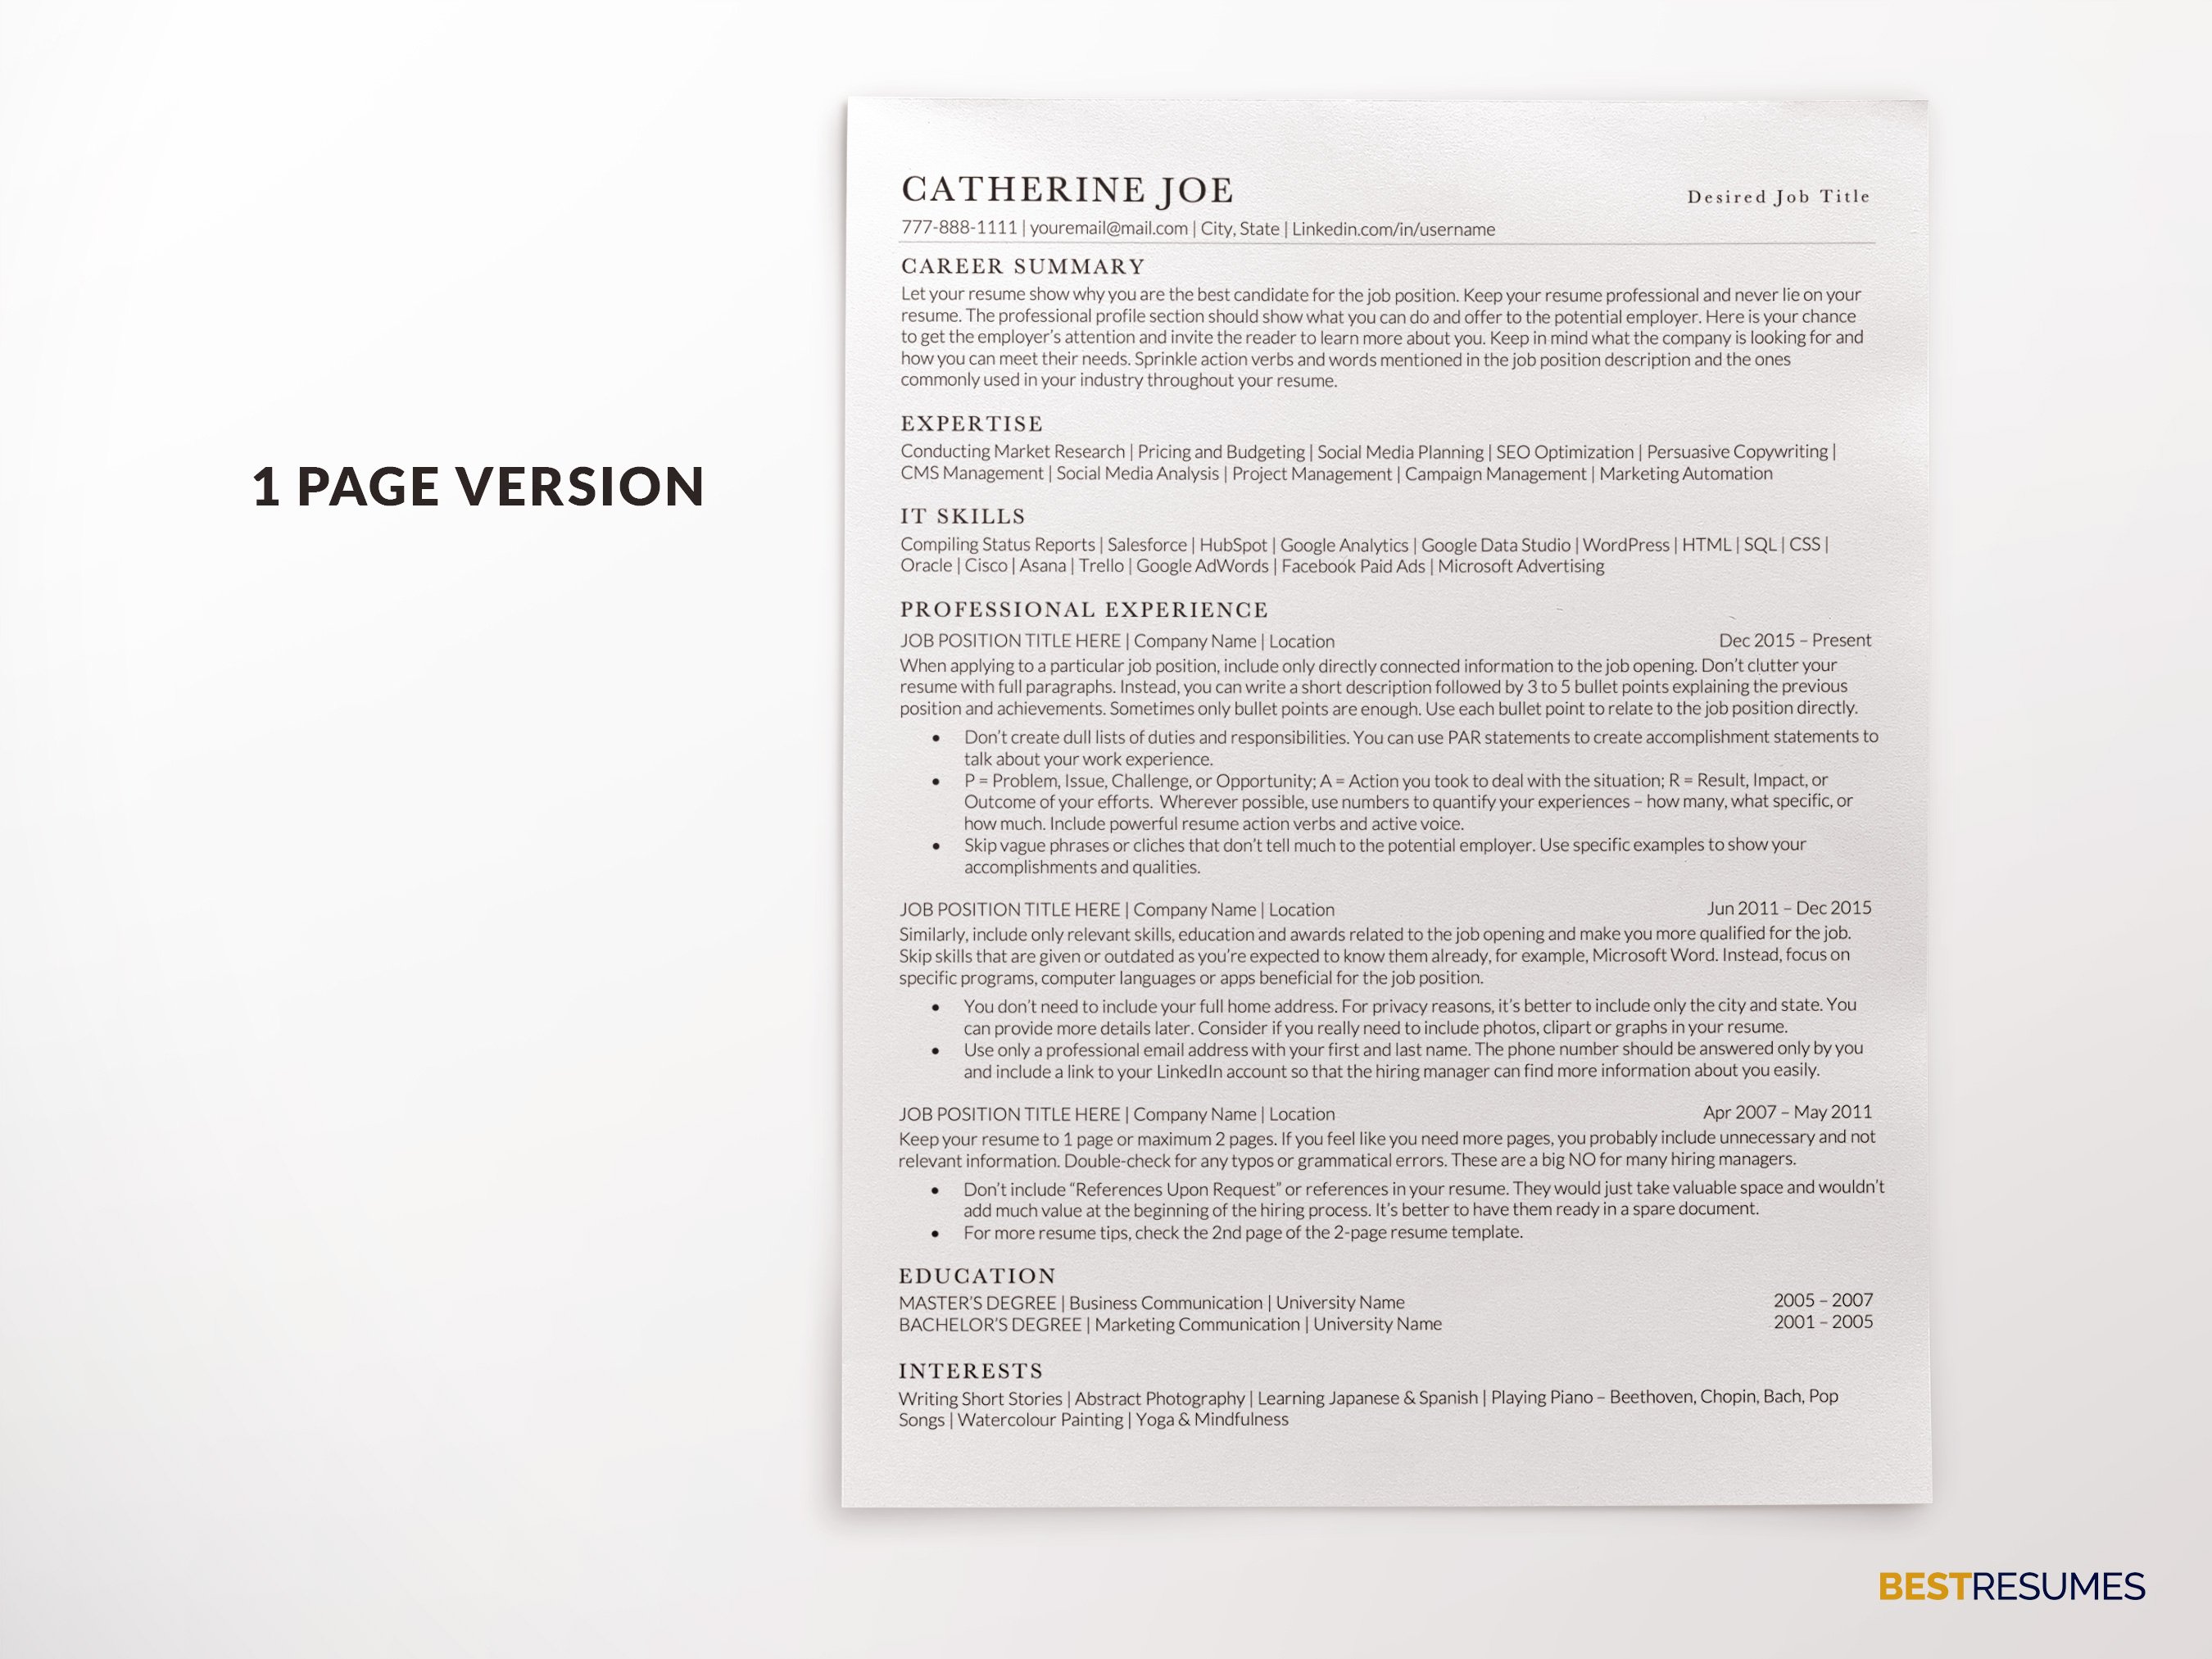 Resume Template for Apple Mac Pages preview image.